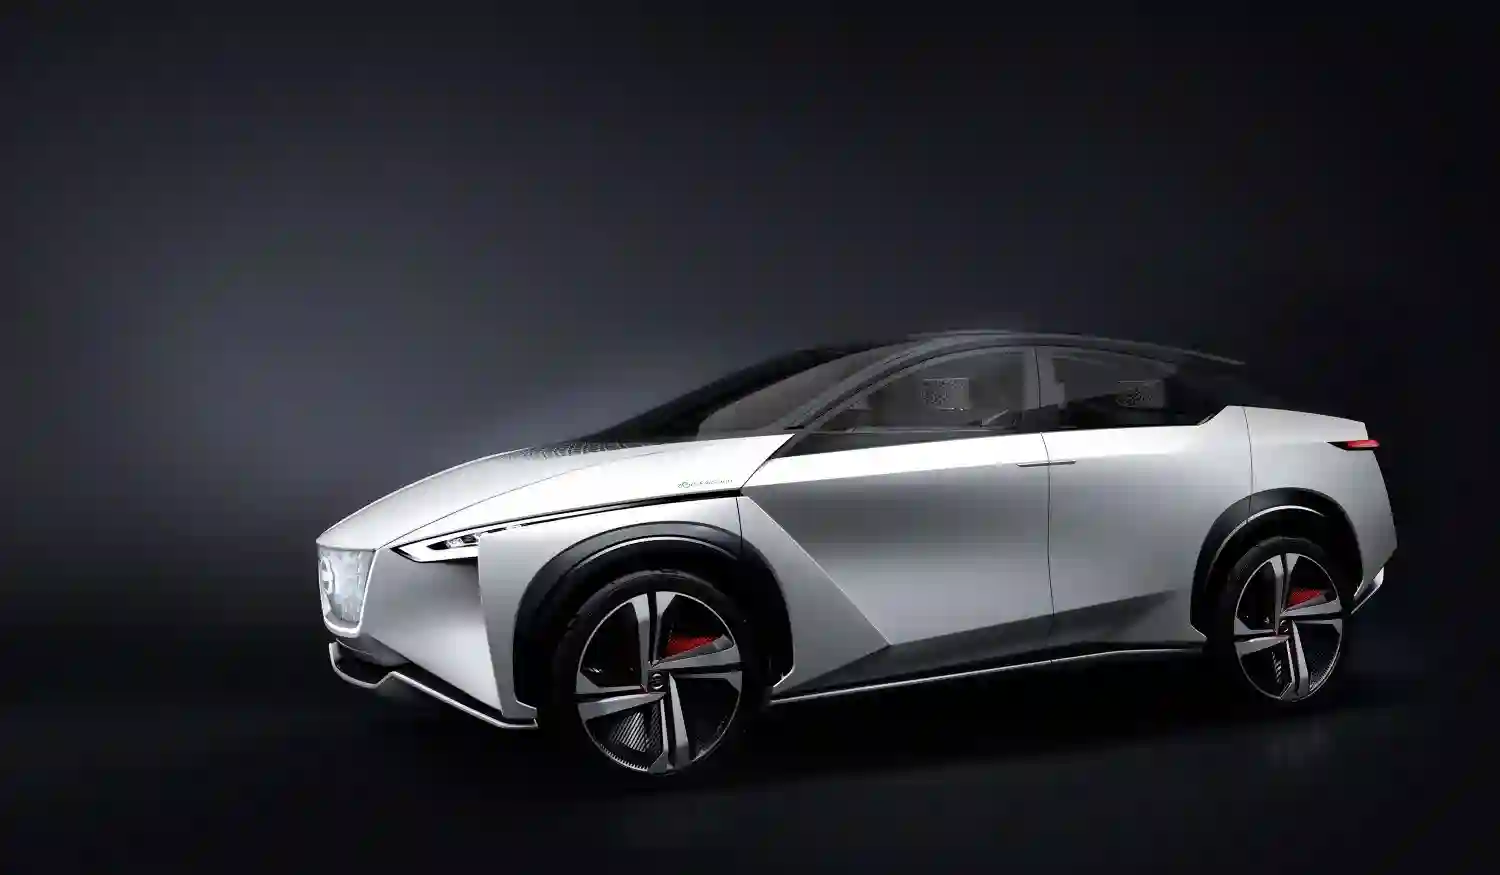 TOKYO MOTOR SHOW CONCEPT CAR THE FUTURE OF NISSAN INTELLIGENT MOBILITY